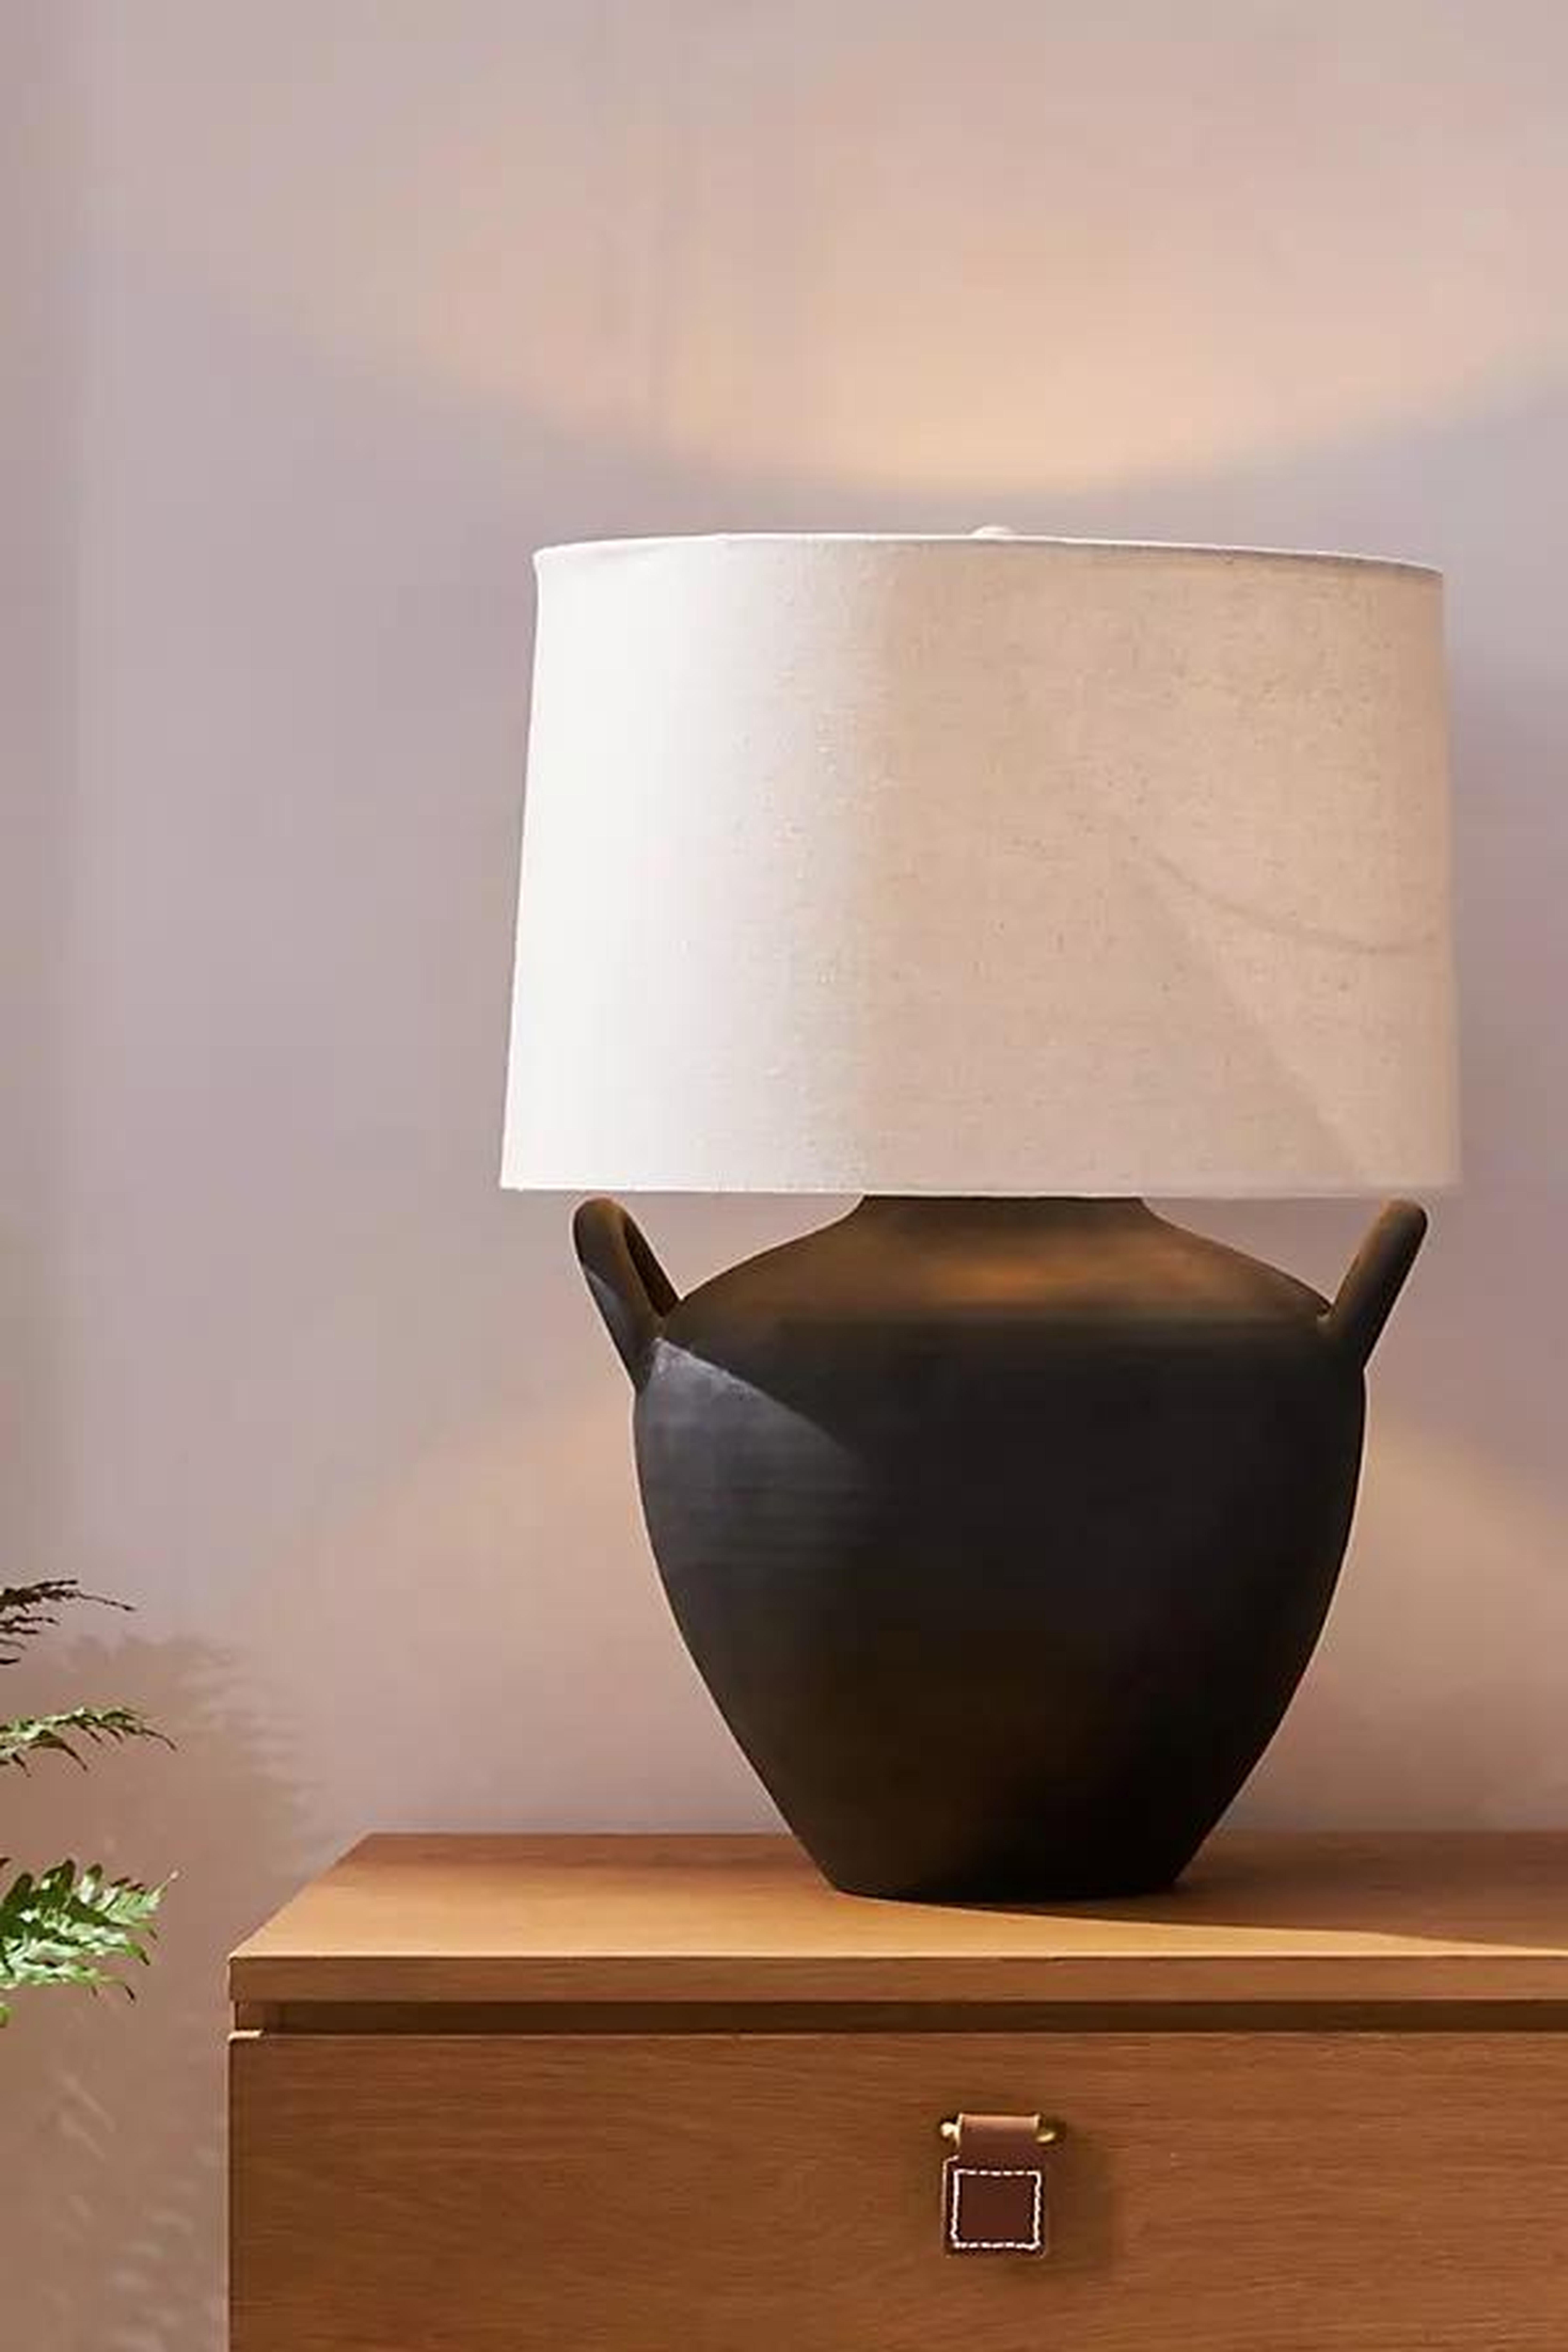 Amber Lewis for Anthropologie Marana Table Lamp By Amber Lewis for Anthropologie in Assorted Size S - Anthropologie